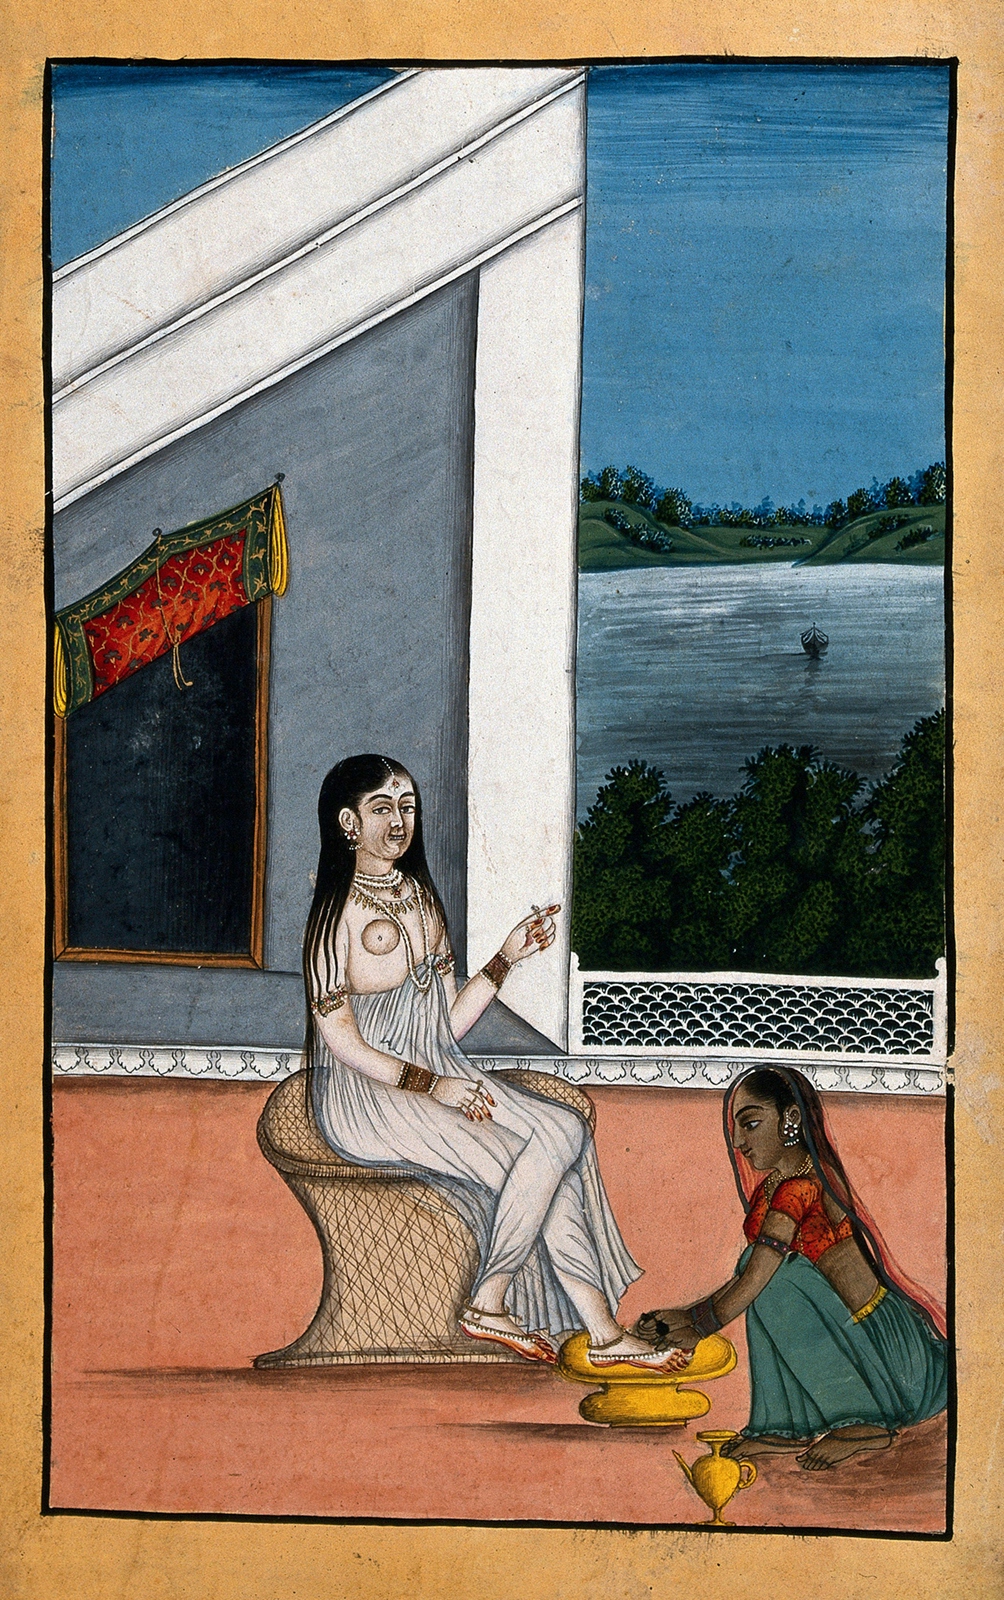 A brightly coloured painting with a woman sitting in the foreground with another woman at her feet, and a white house and lake in the background.